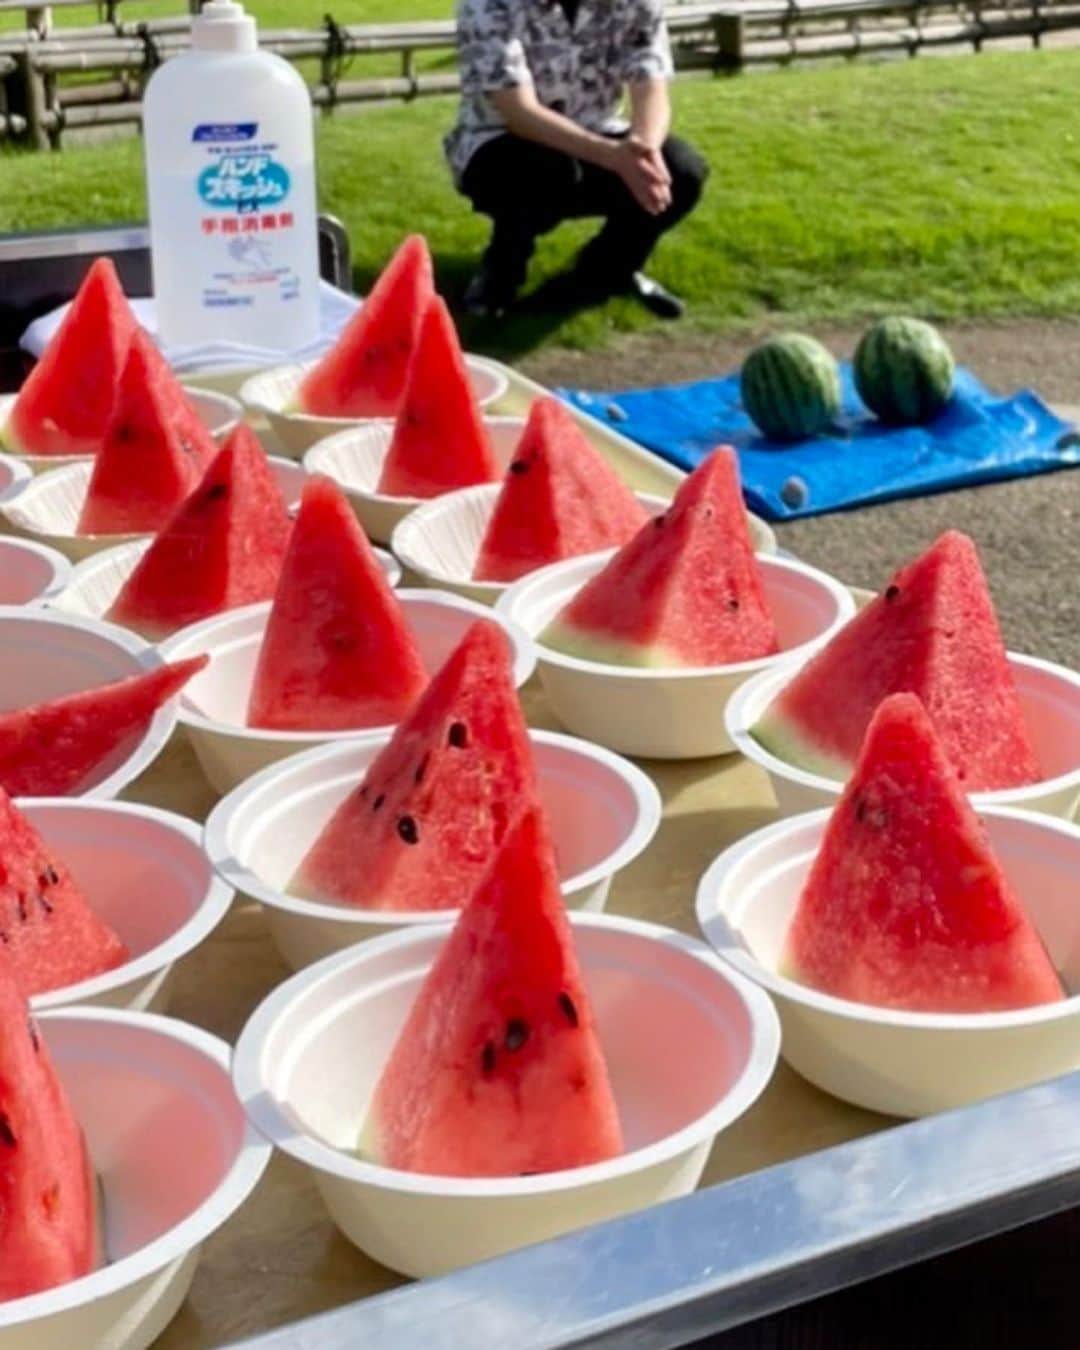 ホテル ニューオータニさんのインスタグラム写真 - (ホテル ニューオータニInstagram)「【July 27th is national Watermelon Day 本日7/27は #スイカ の日🍉】  During the summer holiday season in August, we will hold our annual watermelon splitting event in the garden this year for our guests only! After enjoying the splitting the watermelons guest can enjoy the cool and delicious watermelon under summer’s blue skies.  Other events include our popular "Garden Fireworks" (for guests only), an insect workshop open to guests, Kids Playland, an Uchiwa (Japanese fan) painting workshops and many more perfect activities for summer vacation.  For reservations and more information, tap the "HOTEL NEW OTANI SUMMER 2023" banner from the URL in @hotelnewotanitokyo profile and check the "Events" tab🔍.  8月の夏休み期間は、毎年恒例のお庭で#スイカ割り を、ご宿泊の方限定で今年も開催！青空の下、スイカ割りを愉しんだ後は、ひんやり冷えたスイカをお召し上がりいただけます。  そのほかにも、毎年大人気の「お庭で花火」（宿泊者限定）や、外来の方も参加可能な昆虫教室、プレイランド・うちわの絵付け体験など、夏休みにピッタリのイベントを多数ご用意しております。  ◇ご予約・詳細は @hotelnewotanitokyo プロフィールのURLより「HOTEL NEW OTANI SUMMER 2023」バナーをタップして、「イベント」タブをチェック🔍  Only for guests staying at the HOTEL NEW OTANI Fireworks in the garden 8/1-27 Lantern Garden Walk 8/1-31 Summer Yoga & Stretch Class 8/5, 19, 26 Watermelon Split in the Garden 8/12 & 8/13  Non staying guest participation available Otani Kids Land (Playland, Uchiwa Painting Experience) 8/12-8/15 Let's capture your summer memories with a photo shoot by professional photographers 8/12-8/15 Summer Vacation Insect Workshop 8/13 SDGs workshop for parents and children to think about sustainable future foods 8/20  *Photographs shown are from last year.  【宿泊者限定】 お庭で花火 8/1〜27 ランタンガーデンウォーク 8/1〜31 サマーヨガ&ストレッチ教室 8/5・19・26 お庭でスイカ割り 8/12・8/13  【外来参加可】 オータニキッズランド(プレイランド・うちわの絵付け体験) 8/12〜8/15 思い出を写そう(プロカメラマンによる撮影) 8/12〜8/15 夏休み昆虫教室 8/13 未来の食を考える、親子でSDGsワークショップ 8/20  ※写真は昨年の様子です。  投稿で招待券プレゼント🎁 #ニューオータニホリデー キャンペーン🍉🌻  ホテルニューオータニで過ごした夏の思い出の写真または動画に「@hotelnewotanitokyo」をタグ付けし、「#ニューオータニホリデー」とハッシュタグを付けて投稿してください。抽選で宿泊やレストランのご招待券をプレゼントいたします。  応募期間：2023年8月31日（木）まで  #自由研究  #夏休み #夏 #夏休み旅行  #家族旅行 #家族連れ #お子さま連れok #お子さま連れ大歓迎  #ガーデンプール #プール #ホテルプール #ホテル #東京ホテル #ホテルステイ  #ホテルニューオータニ #ニューオータニ #hotelnewotani #newotani #赤坂見附 #赤坂 #四ツ谷 #tokyotravel #tokyohotel  #virtualtour#forbestravelguide #futuretravelguide #thepreferredlife」7月27日 13時21分 - hotelnewotanitokyo